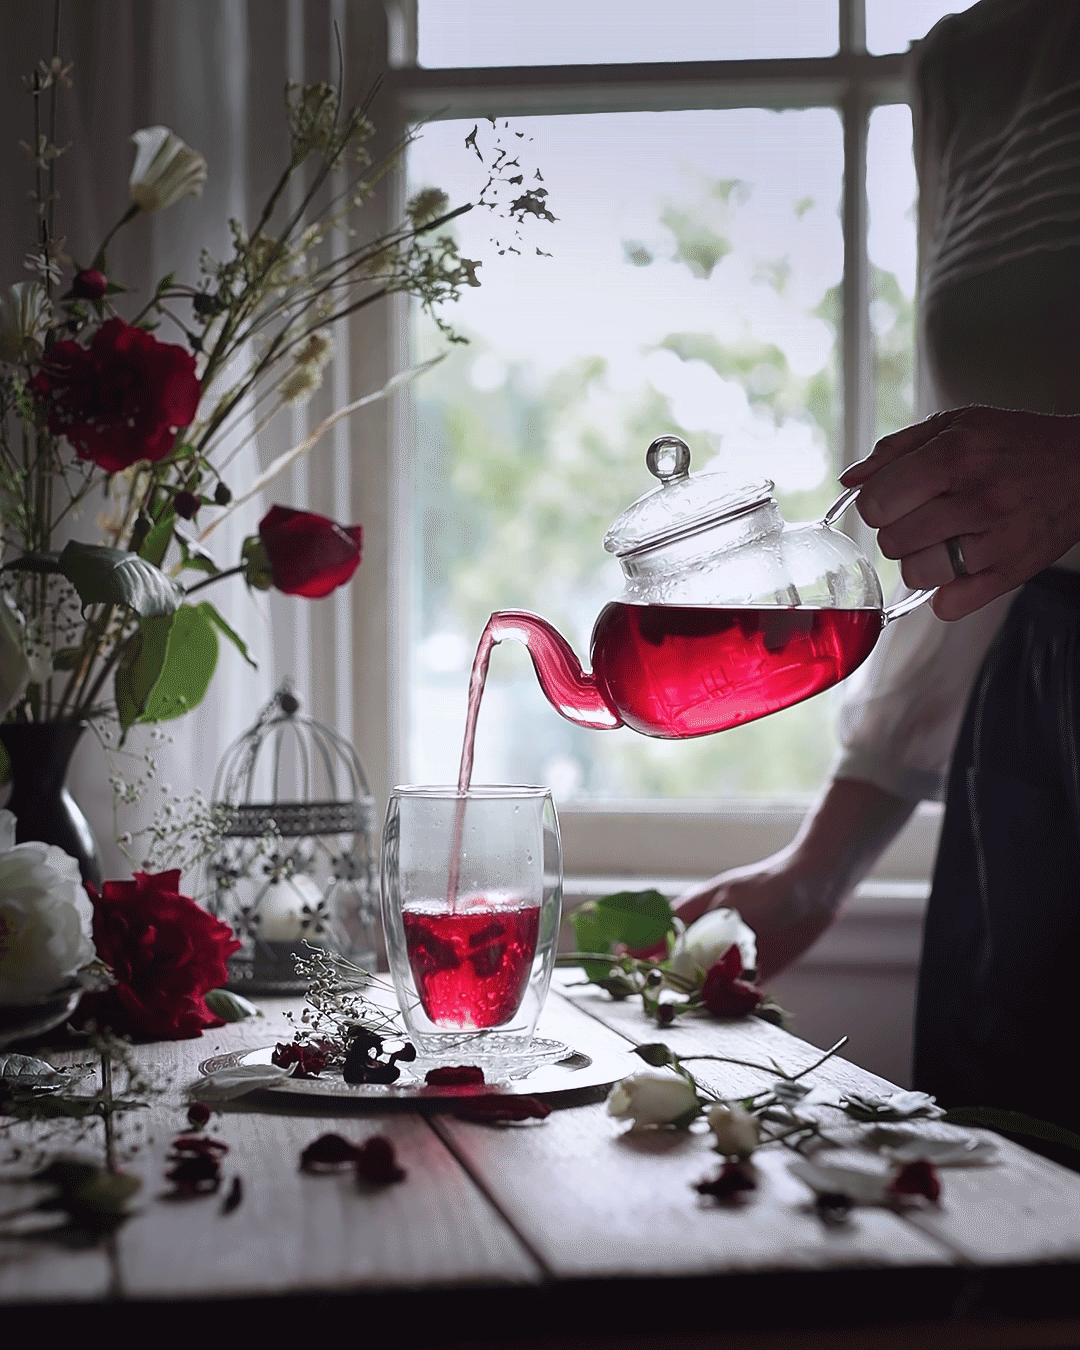 Cinemgraph of a red tea being poured from a glass tea pot into a glass cup in front of window